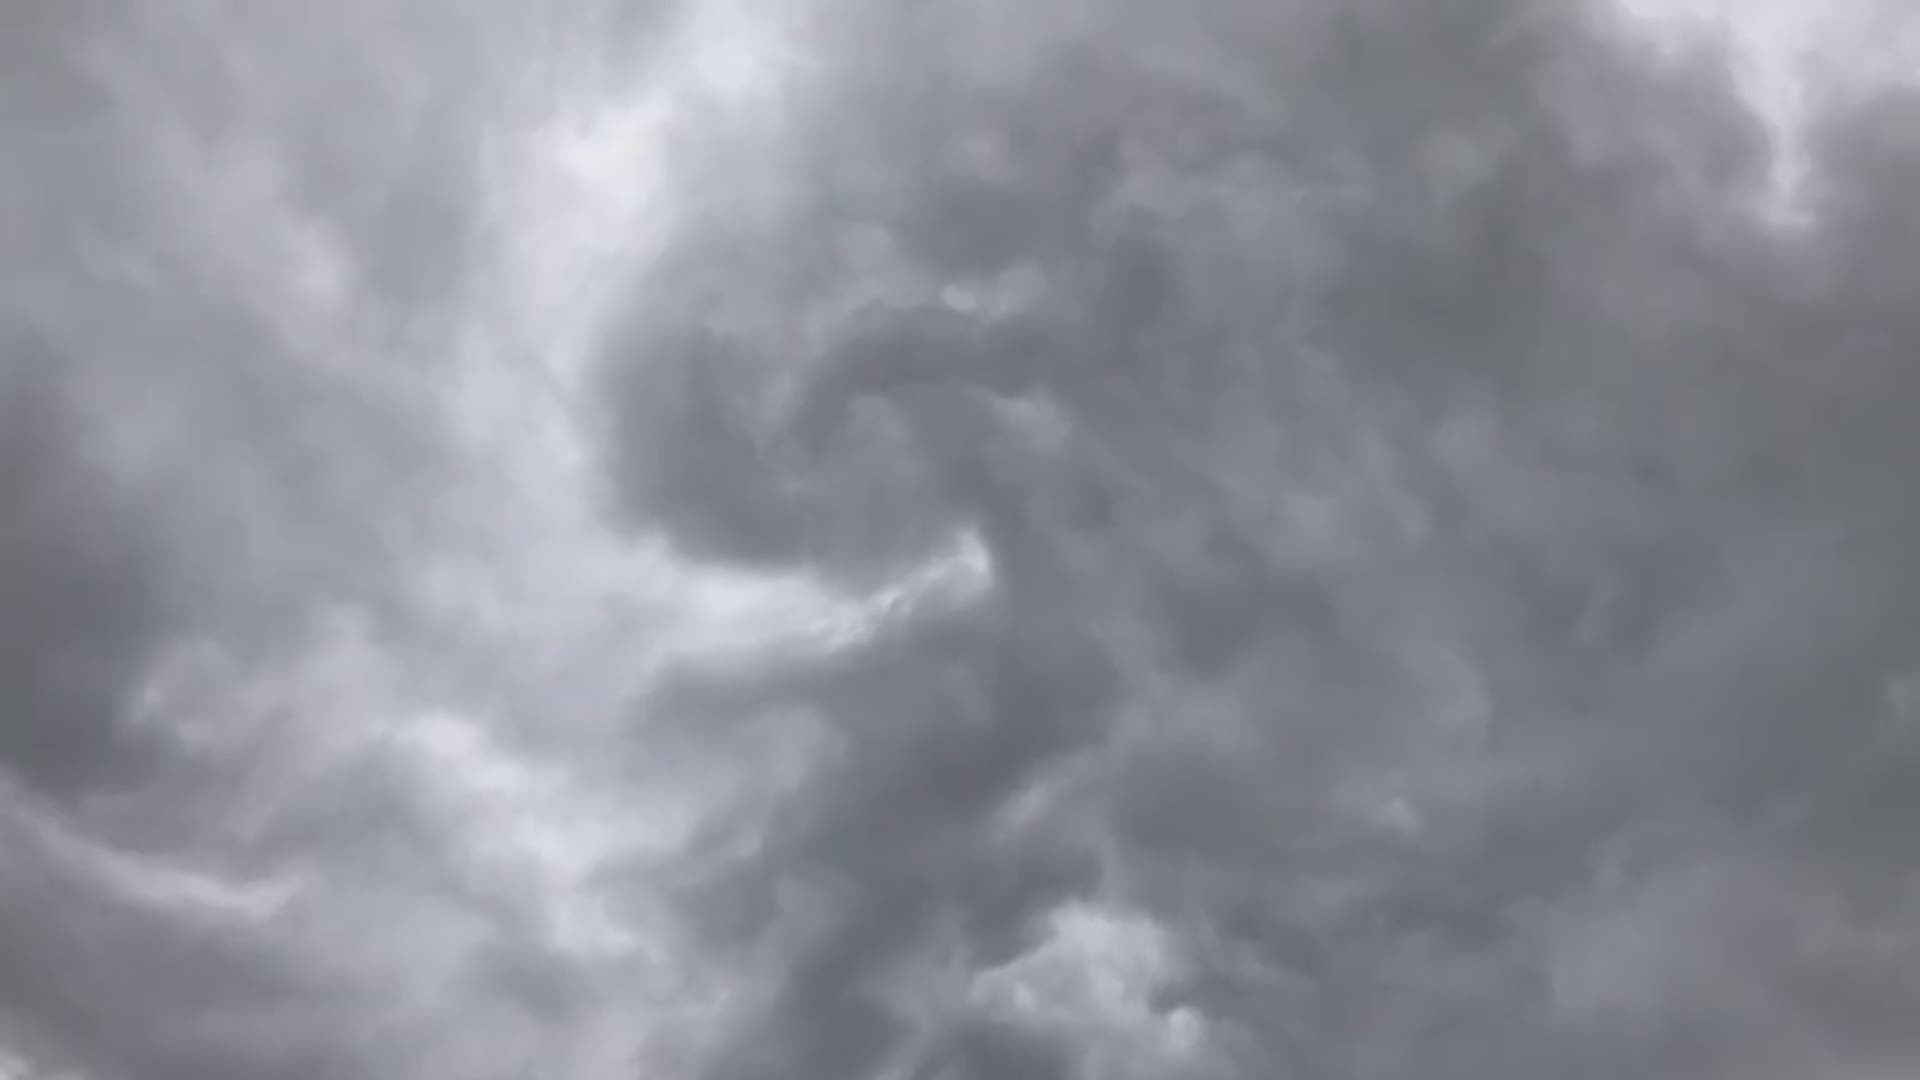 A viewer submitted this video of a cloud rotation over Denison, Texas on June 23, 2019.